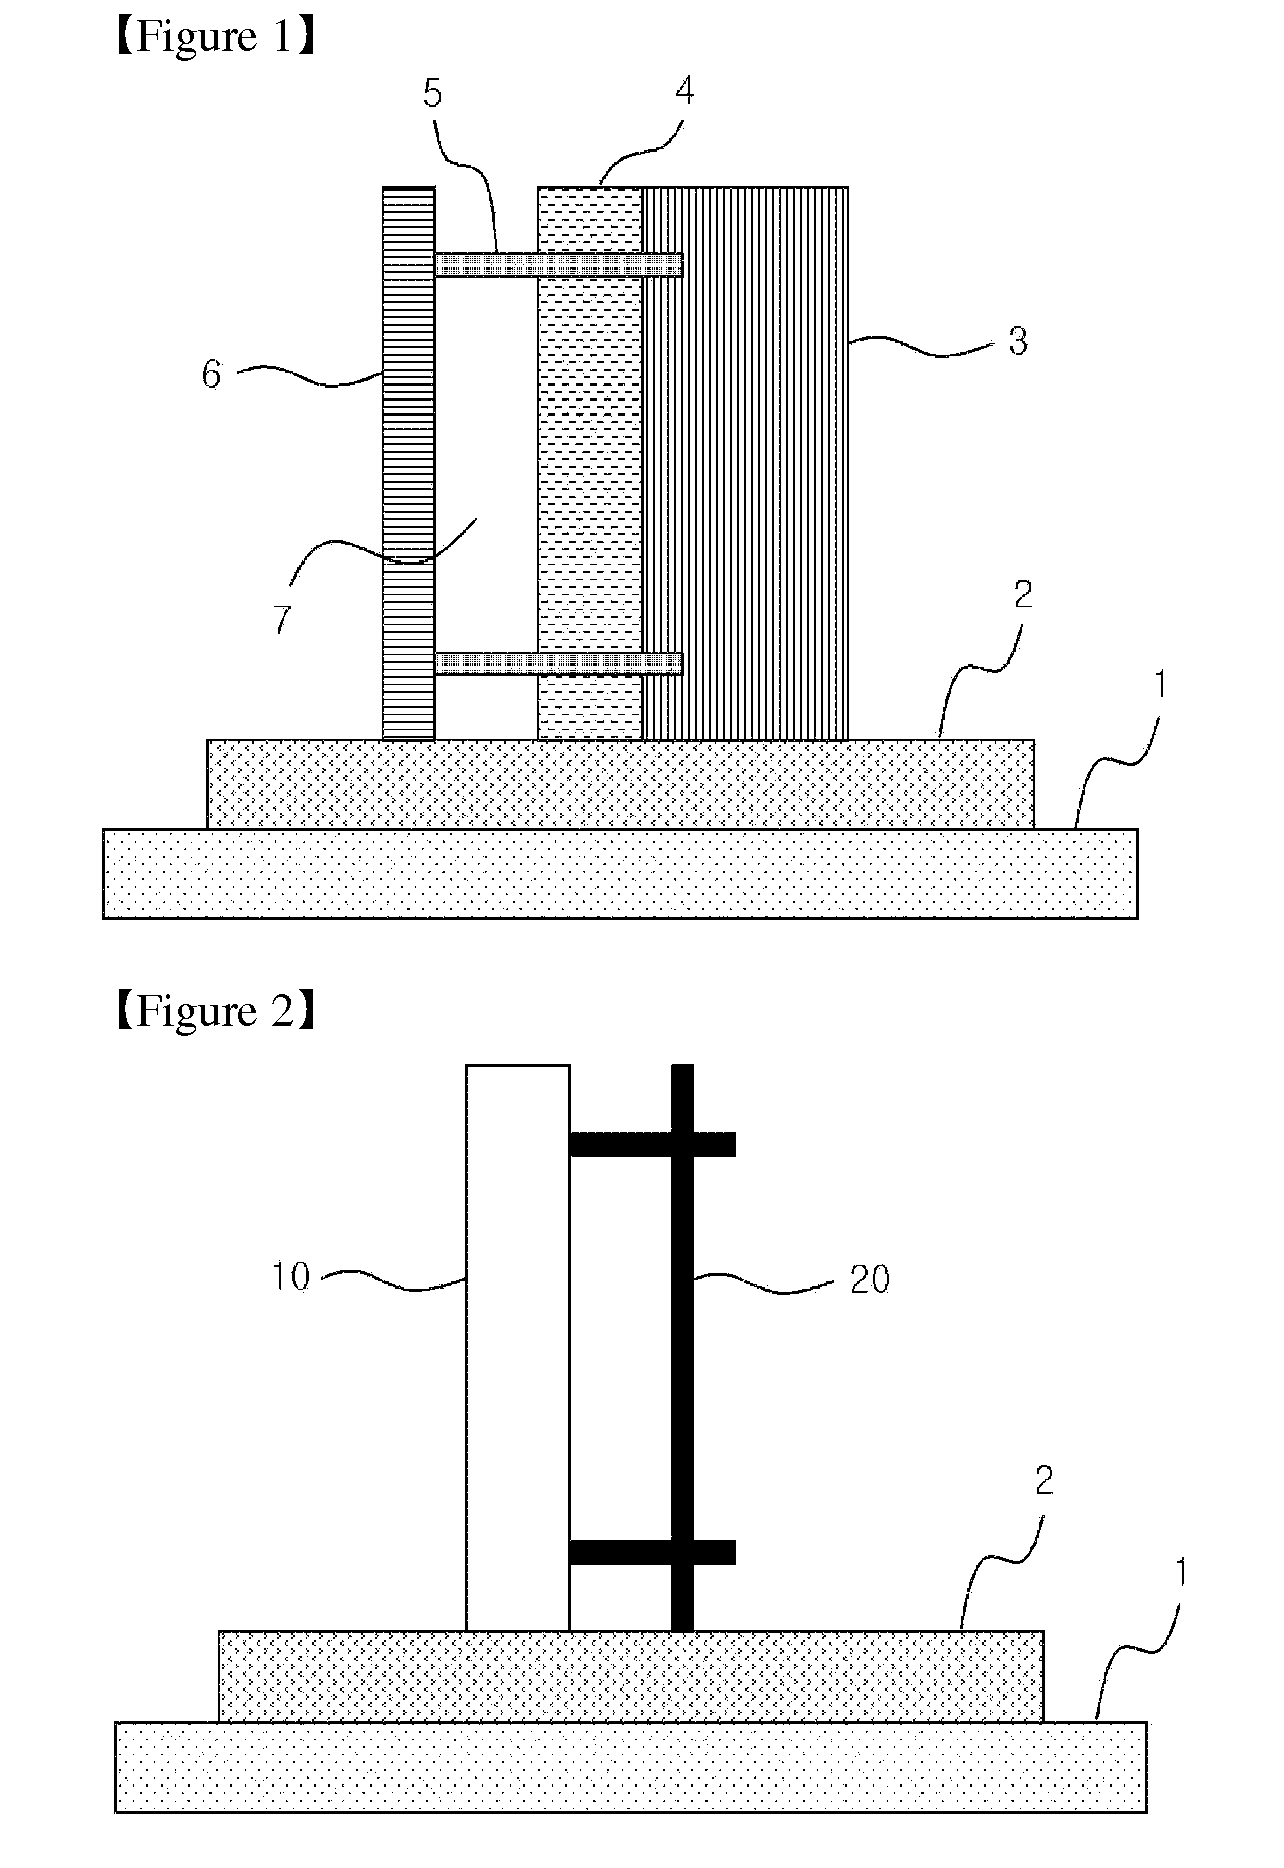 Solar cell module with layers of design for integration into buildings